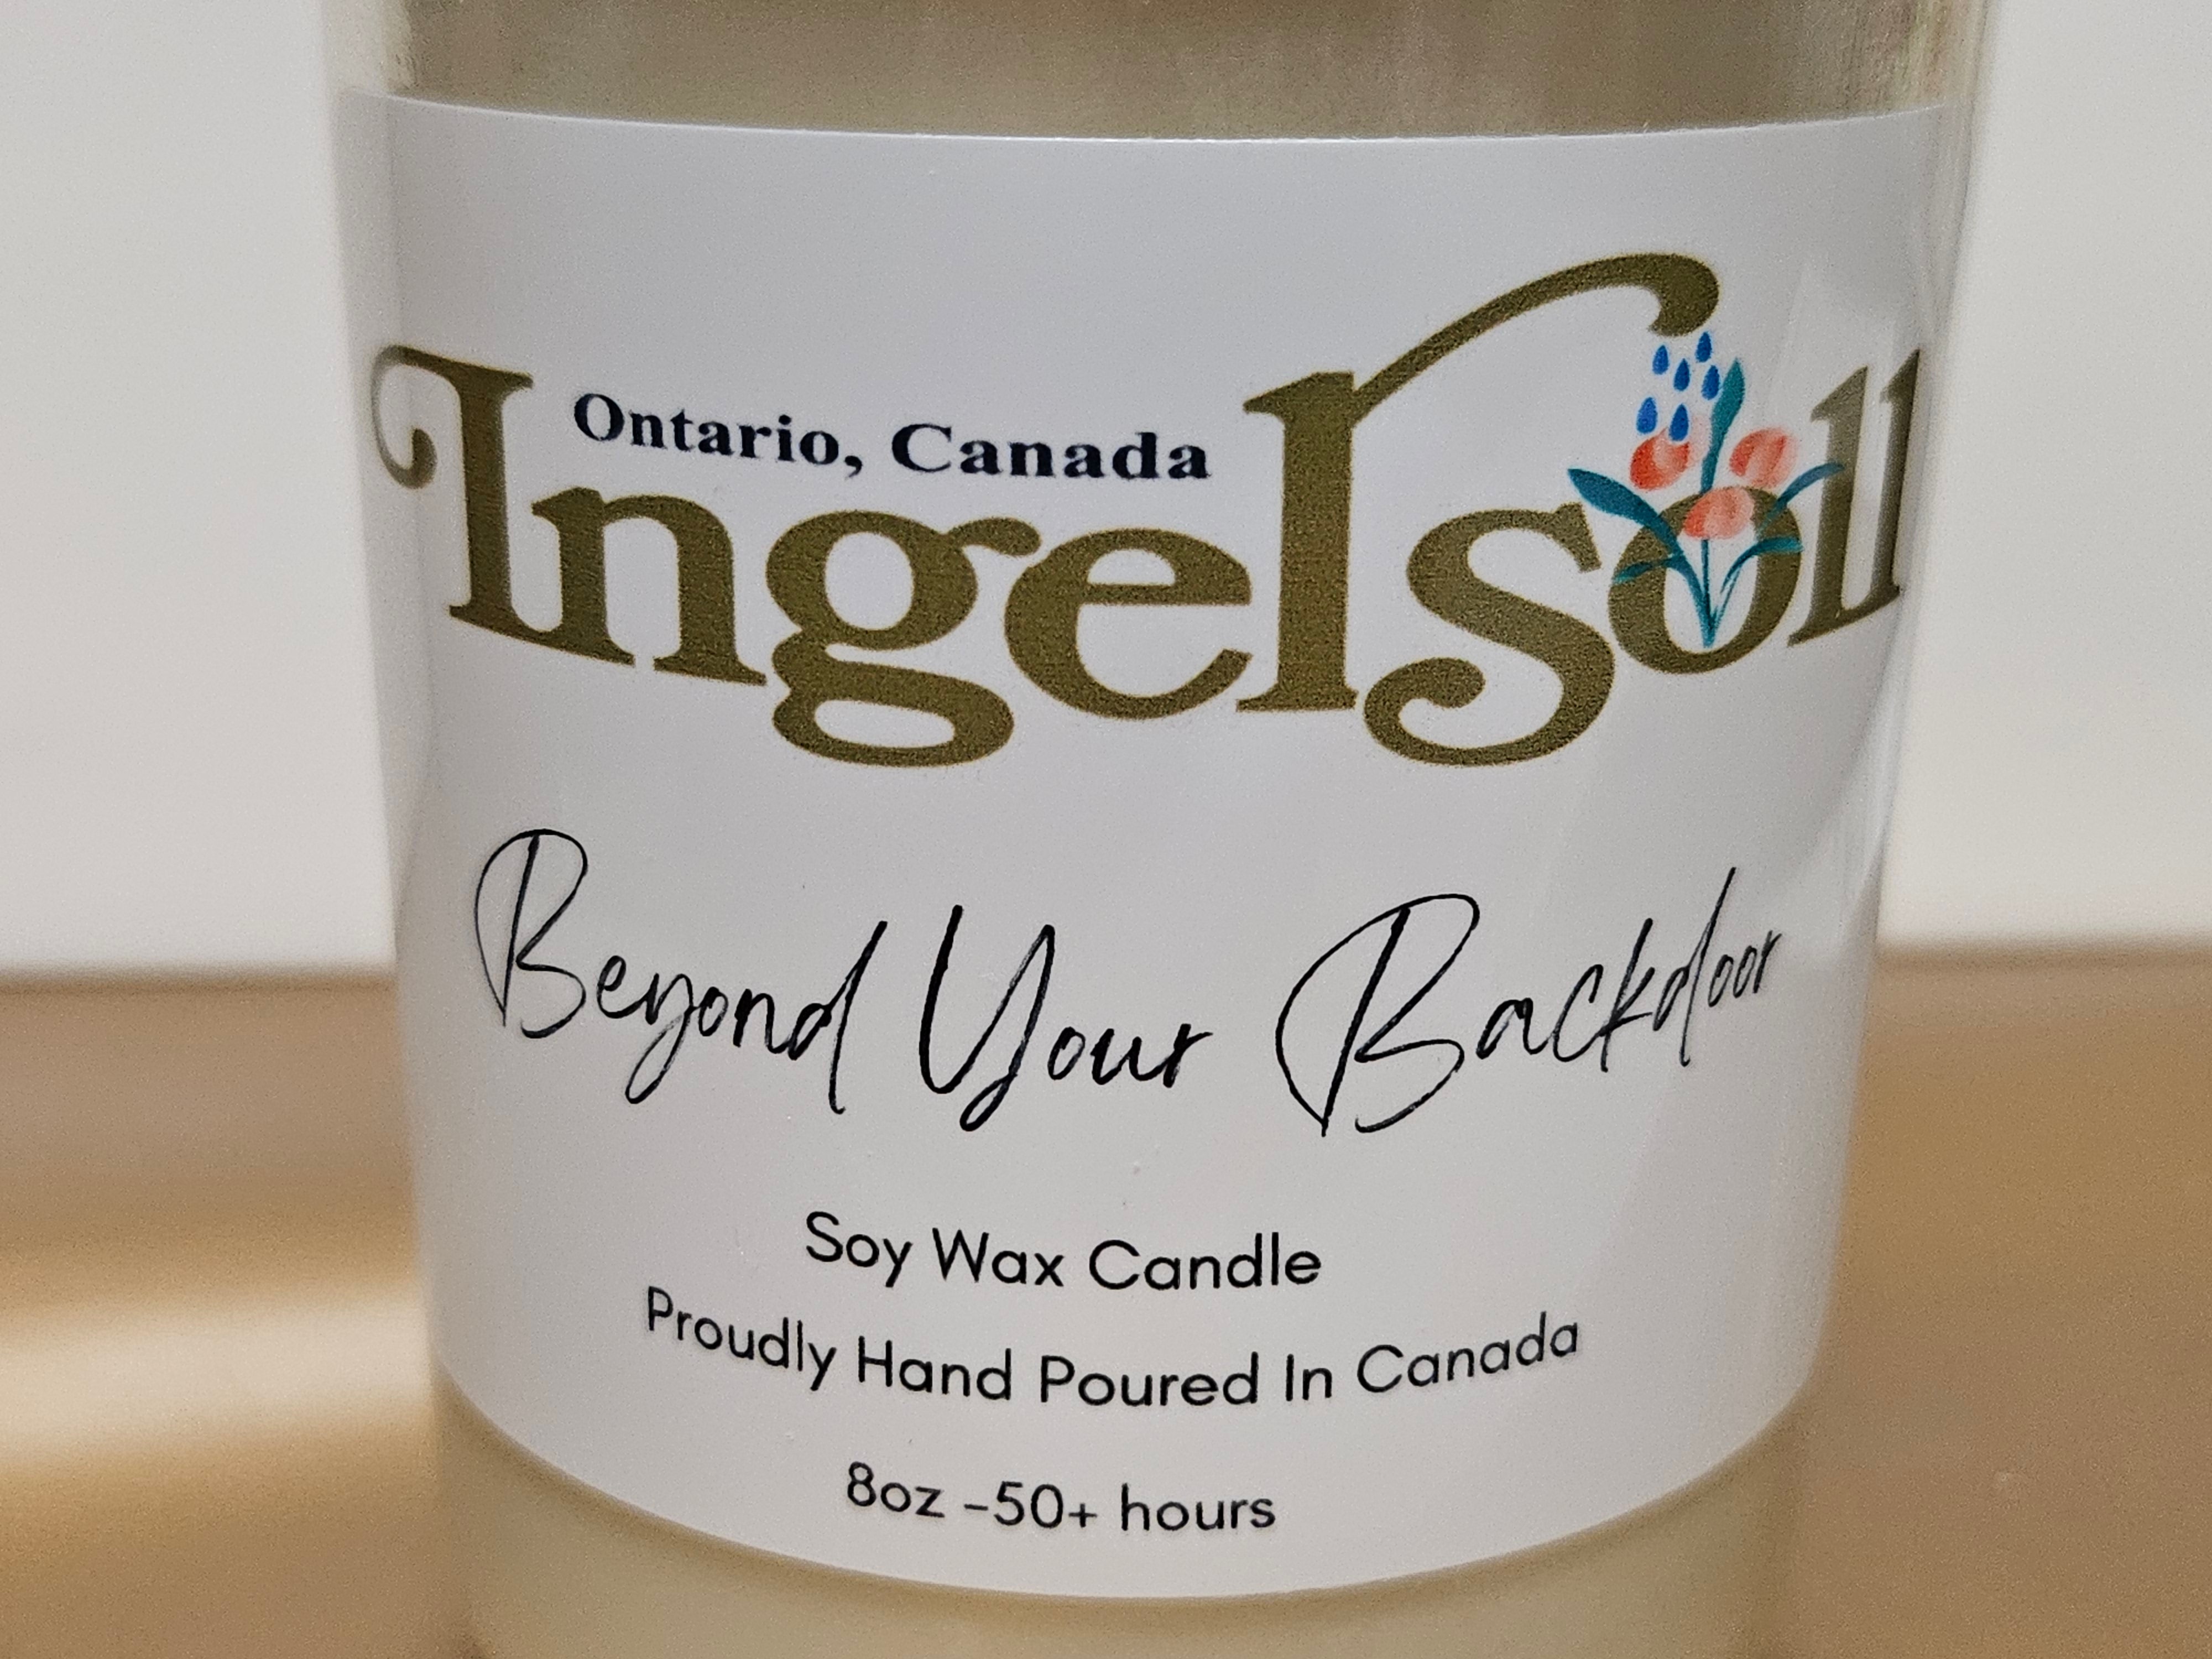 Ingersoll Soy Wax Candle - Beyond Your Backdoor - 8oz